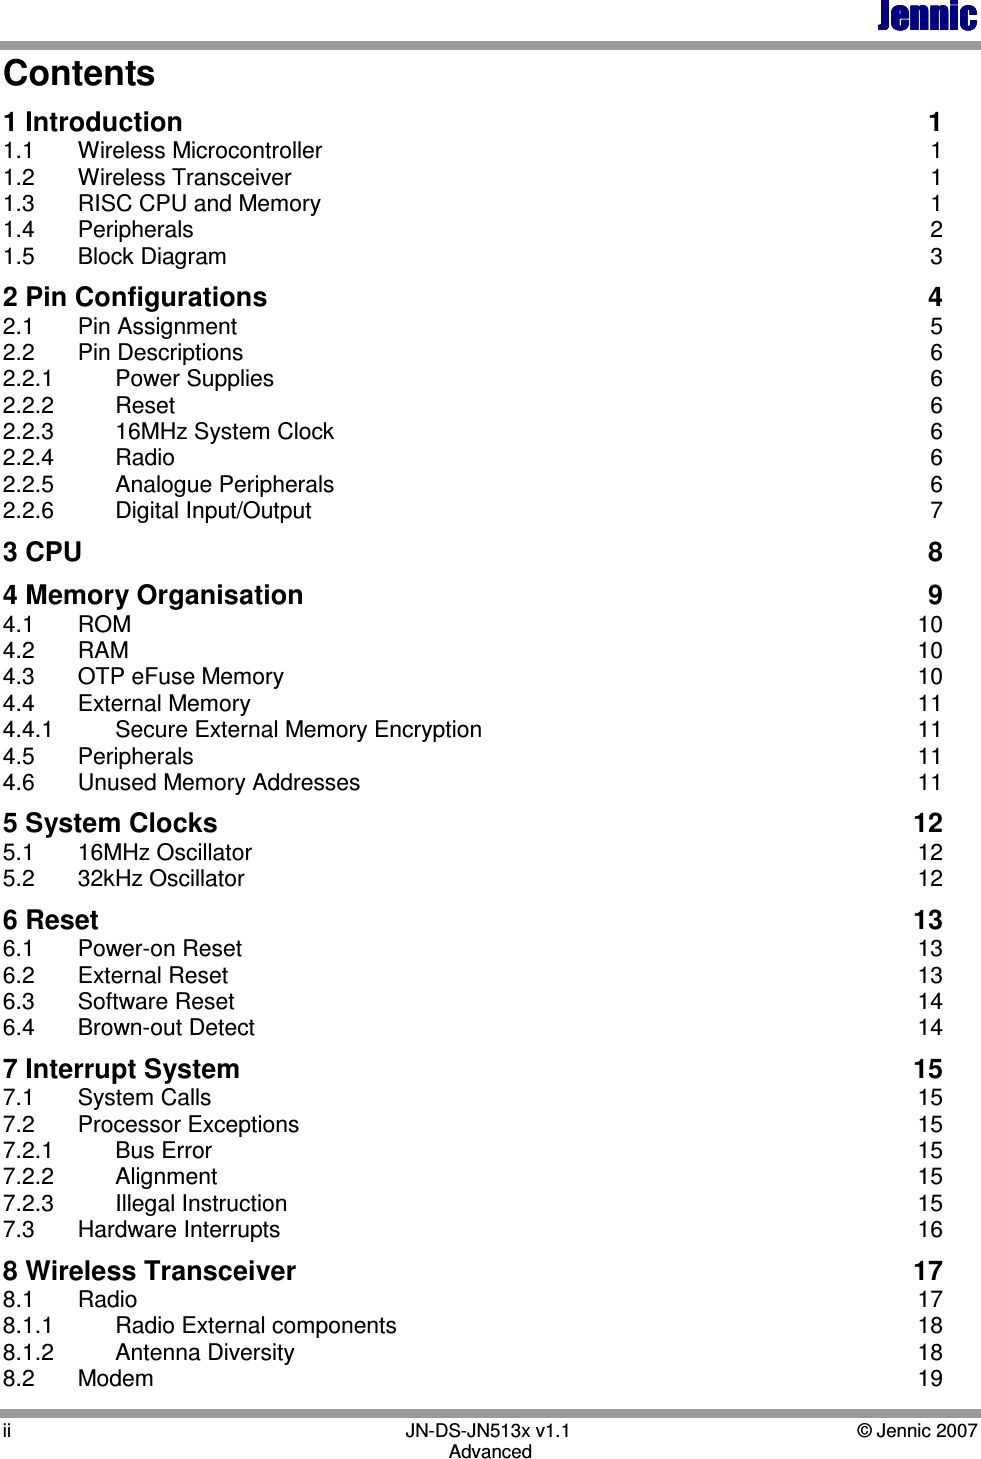 JennicJennicJennicJennic ii        JN-DS-JN513x v1.1  © Jennic 2007 Advanced Contents 1 Introduction  1 1.1  Wireless Microcontroller  1 1.2  Wireless Transceiver  1 1.3  RISC CPU and Memory  1 1.4  Peripherals  2 1.5  Block Diagram  3 2 Pin Configurations  4 2.1   Pin Assignment  5 2.2  Pin Descriptions  6 2.2.1  Power Supplies  6 2.2.2  Reset  6 2.2.3  16MHz System Clock  6 2.2.4  Radio  6 2.2.5  Analogue Peripherals  6 2.2.6  Digital Input/Output  7 3 CPU  8 4 Memory Organisation  9 4.1  ROM  10 4.2  RAM  10 4.3   OTP eFuse Memory  10 4.4  External Memory  11 4.4.1   Secure External Memory Encryption  11 4.5  Peripherals  11 4.6  Unused Memory Addresses  11 5 System Clocks  12 5.1  16MHz Oscillator  12 5.2  32kHz Oscillator  12 6 Reset  13 6.1  Power-on Reset  13 6.2  External Reset  13 6.3  Software Reset  14 6.4  Brown-out Detect  14 7 Interrupt System  15 7.1  System Calls  15 7.2  Processor Exceptions  15 7.2.1  Bus Error  15 7.2.2  Alignment  15 7.2.3  Illegal Instruction  15 7.3  Hardware Interrupts  16 8 Wireless Transceiver  17 8.1  Radio  17 8.1.1  Radio External components  18 8.1.2   Antenna Diversity  18 8.2  Modem  19 